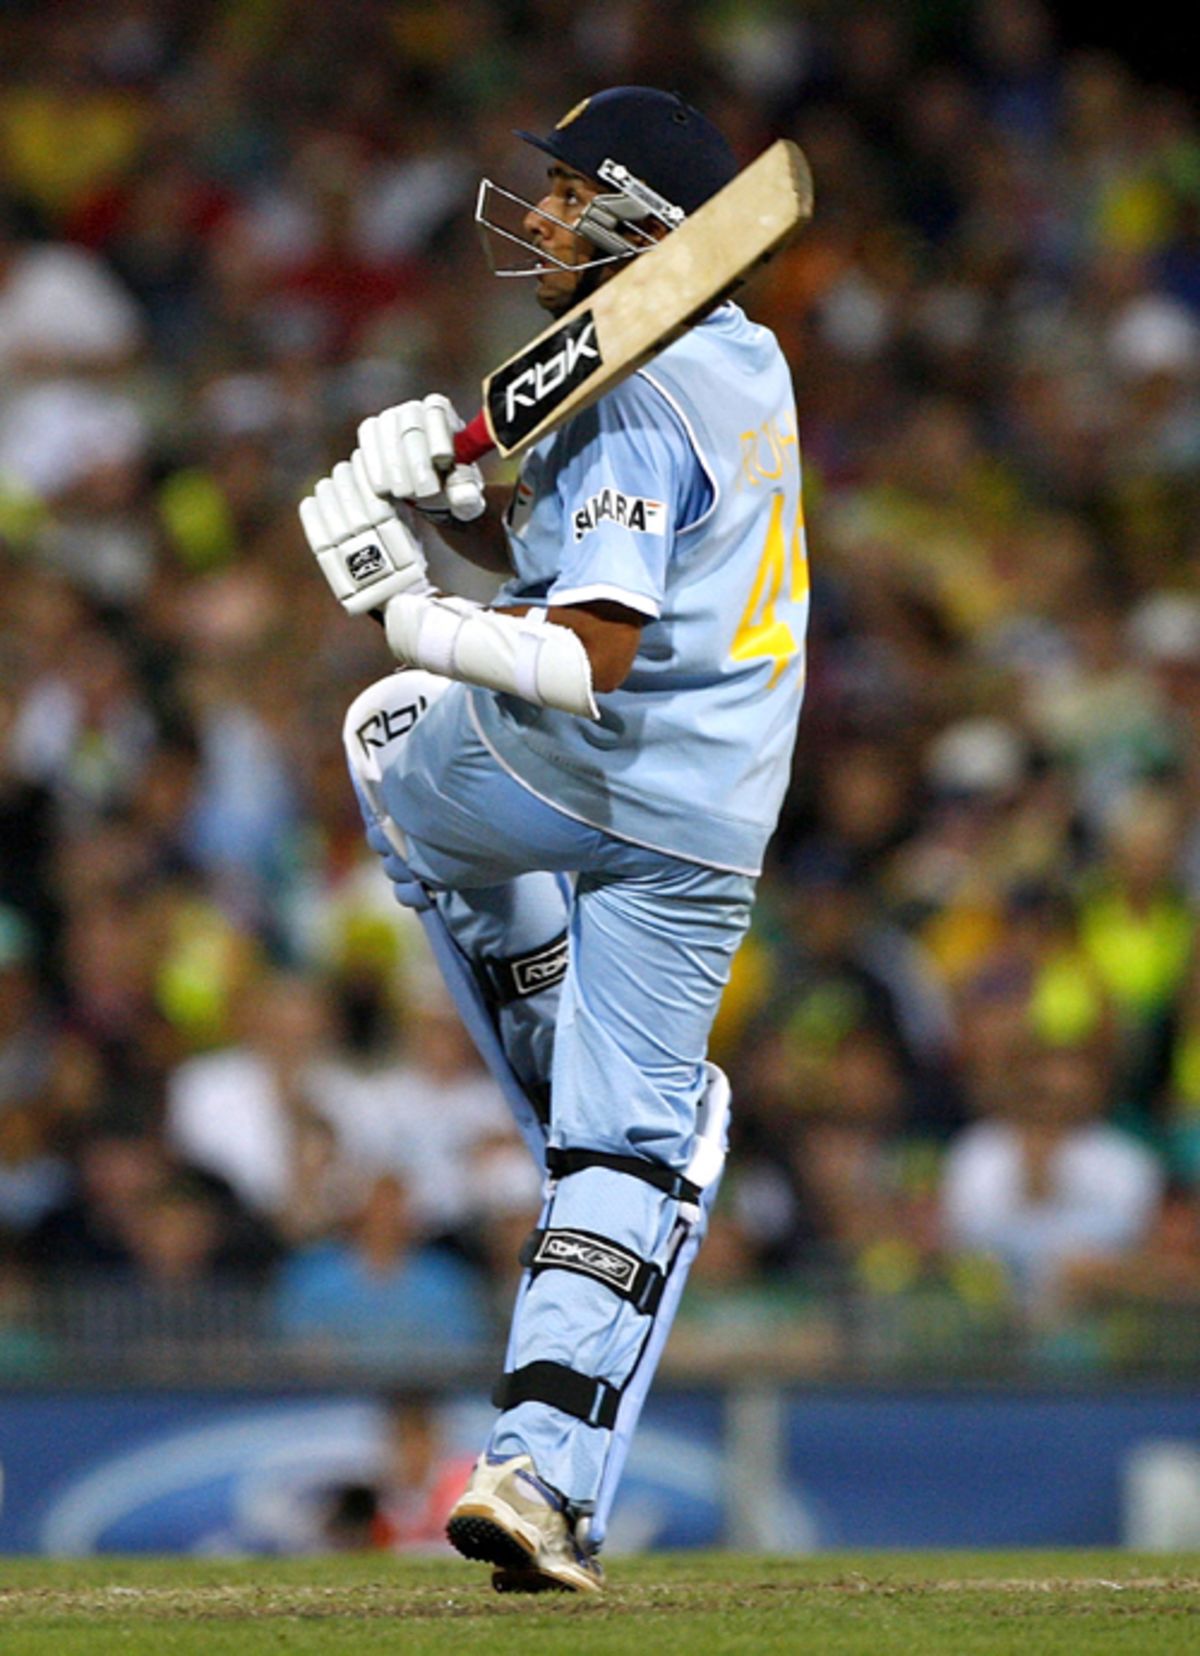 Rohit Sharma pulls the ball during his half-century, Australia v India, CB Series, 1st final, Melbourne, March 2, 2008 

